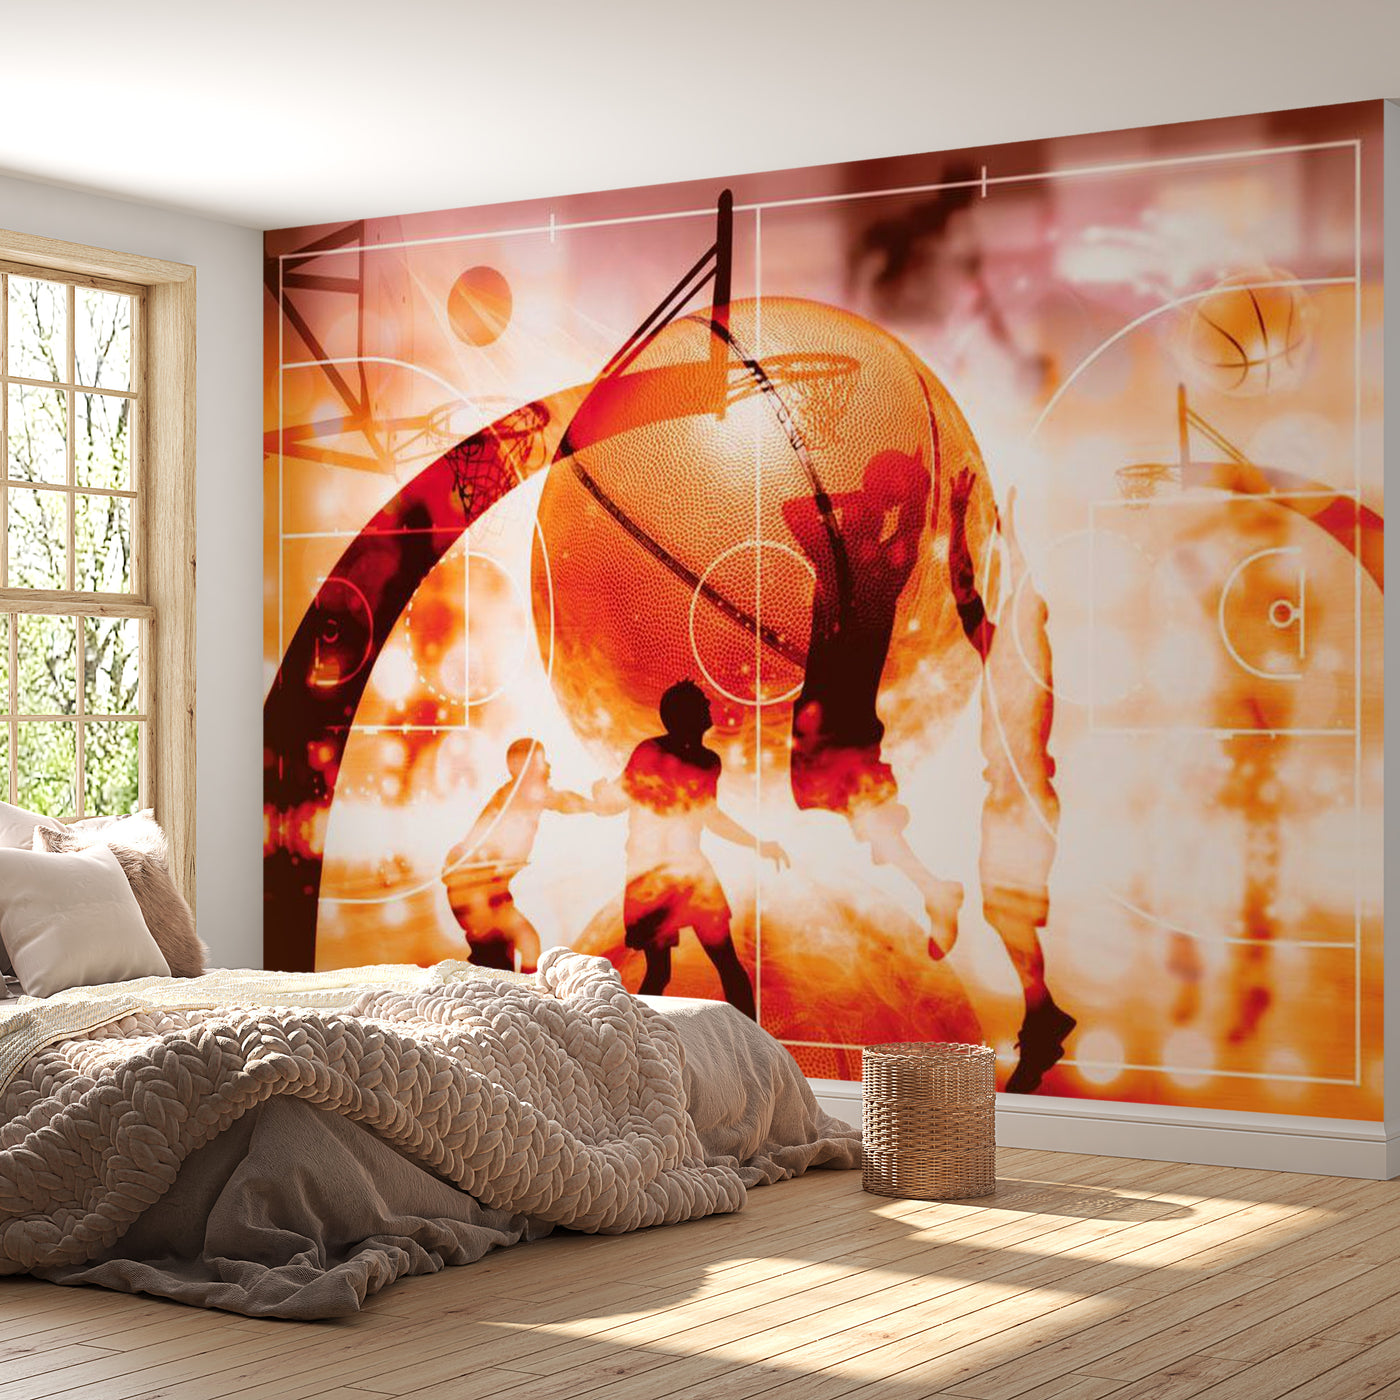 Peel & Stick Basketball Wall Mural - Basketball Game - Removable Wall Decals